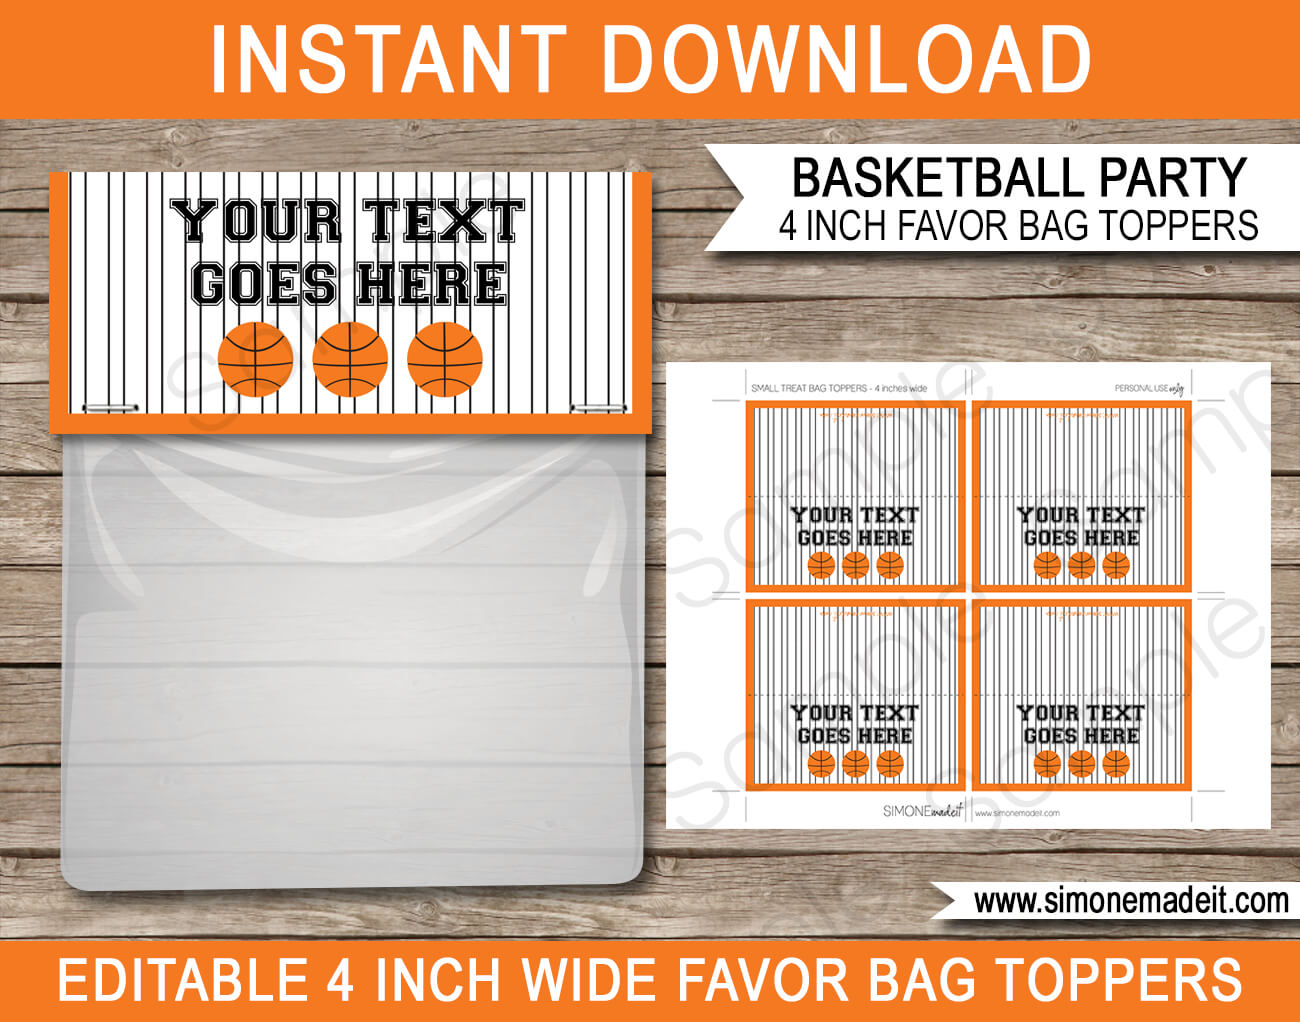 Basketball Party Favors ~ 1DZ Basketball Pencils & 12 Basketball Sticker Sheets Party giveaway Goody bag Sports Theme 12 144 Stickers 